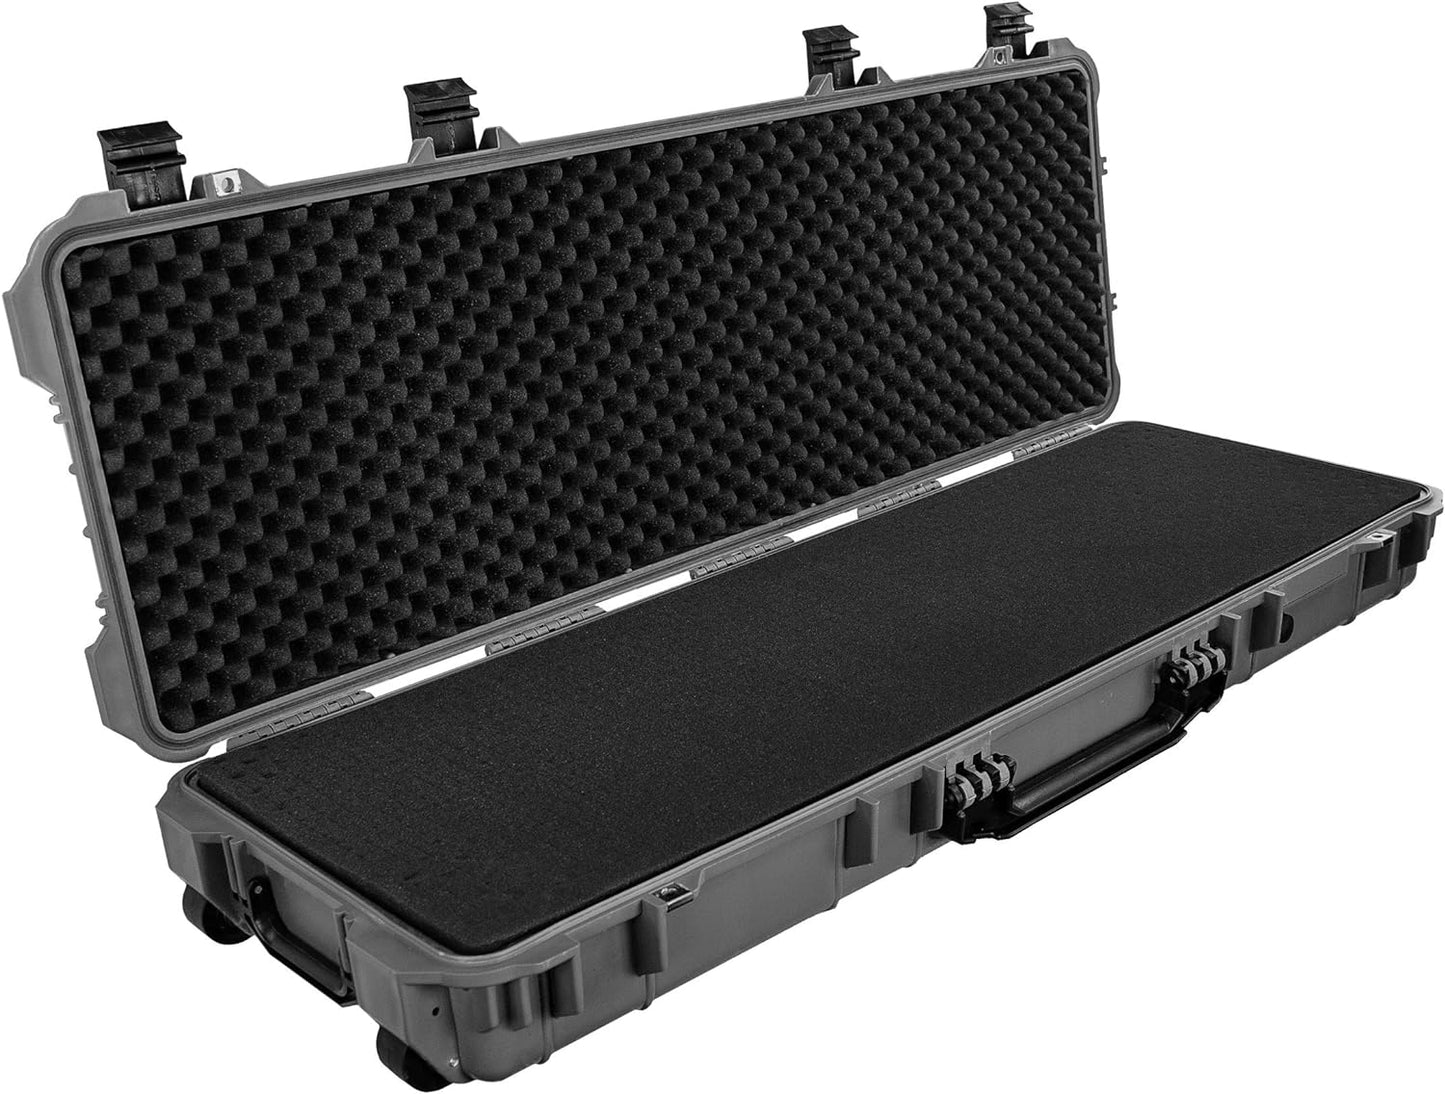 Eylar 44 Inch Protective Roller Rifle Hard Case with Foam - Gray